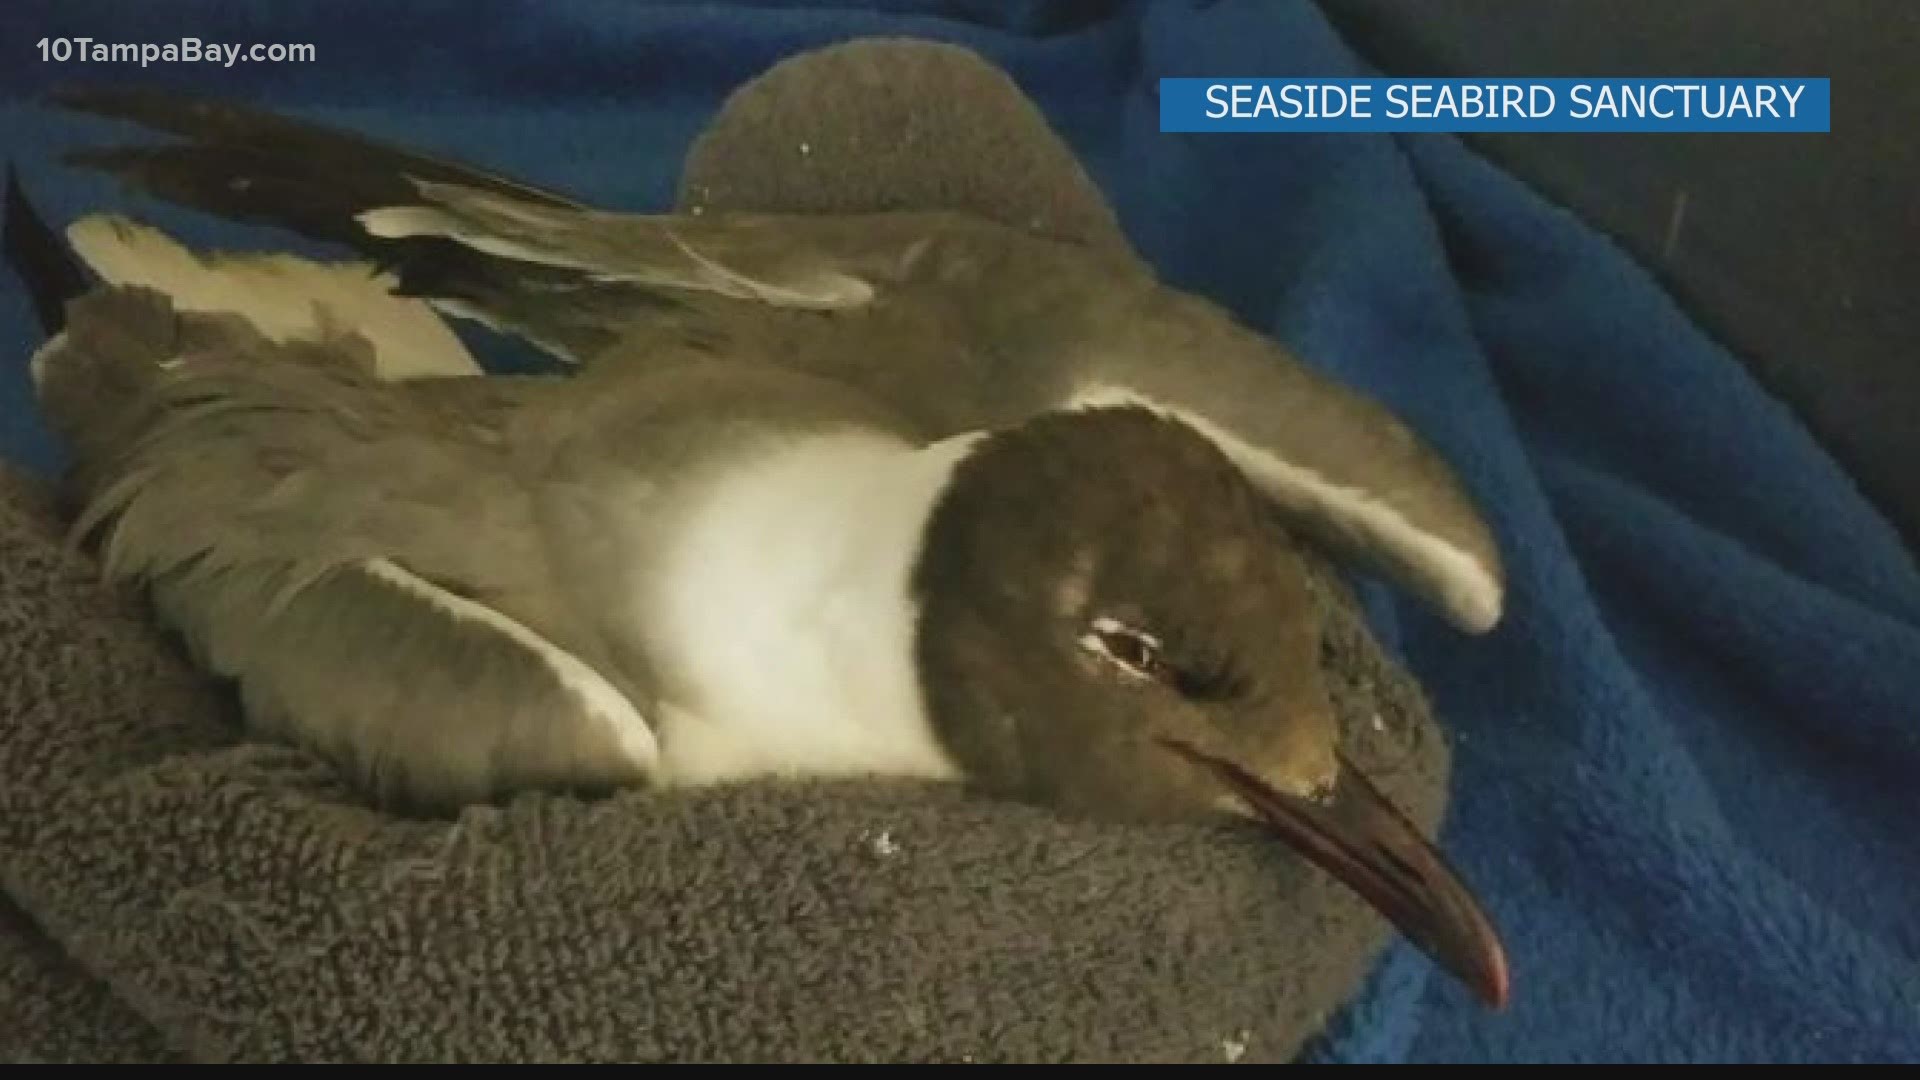 The seabird sanctuary says birds affected by red tide can suffer from loss of motor functions and ability to fly.